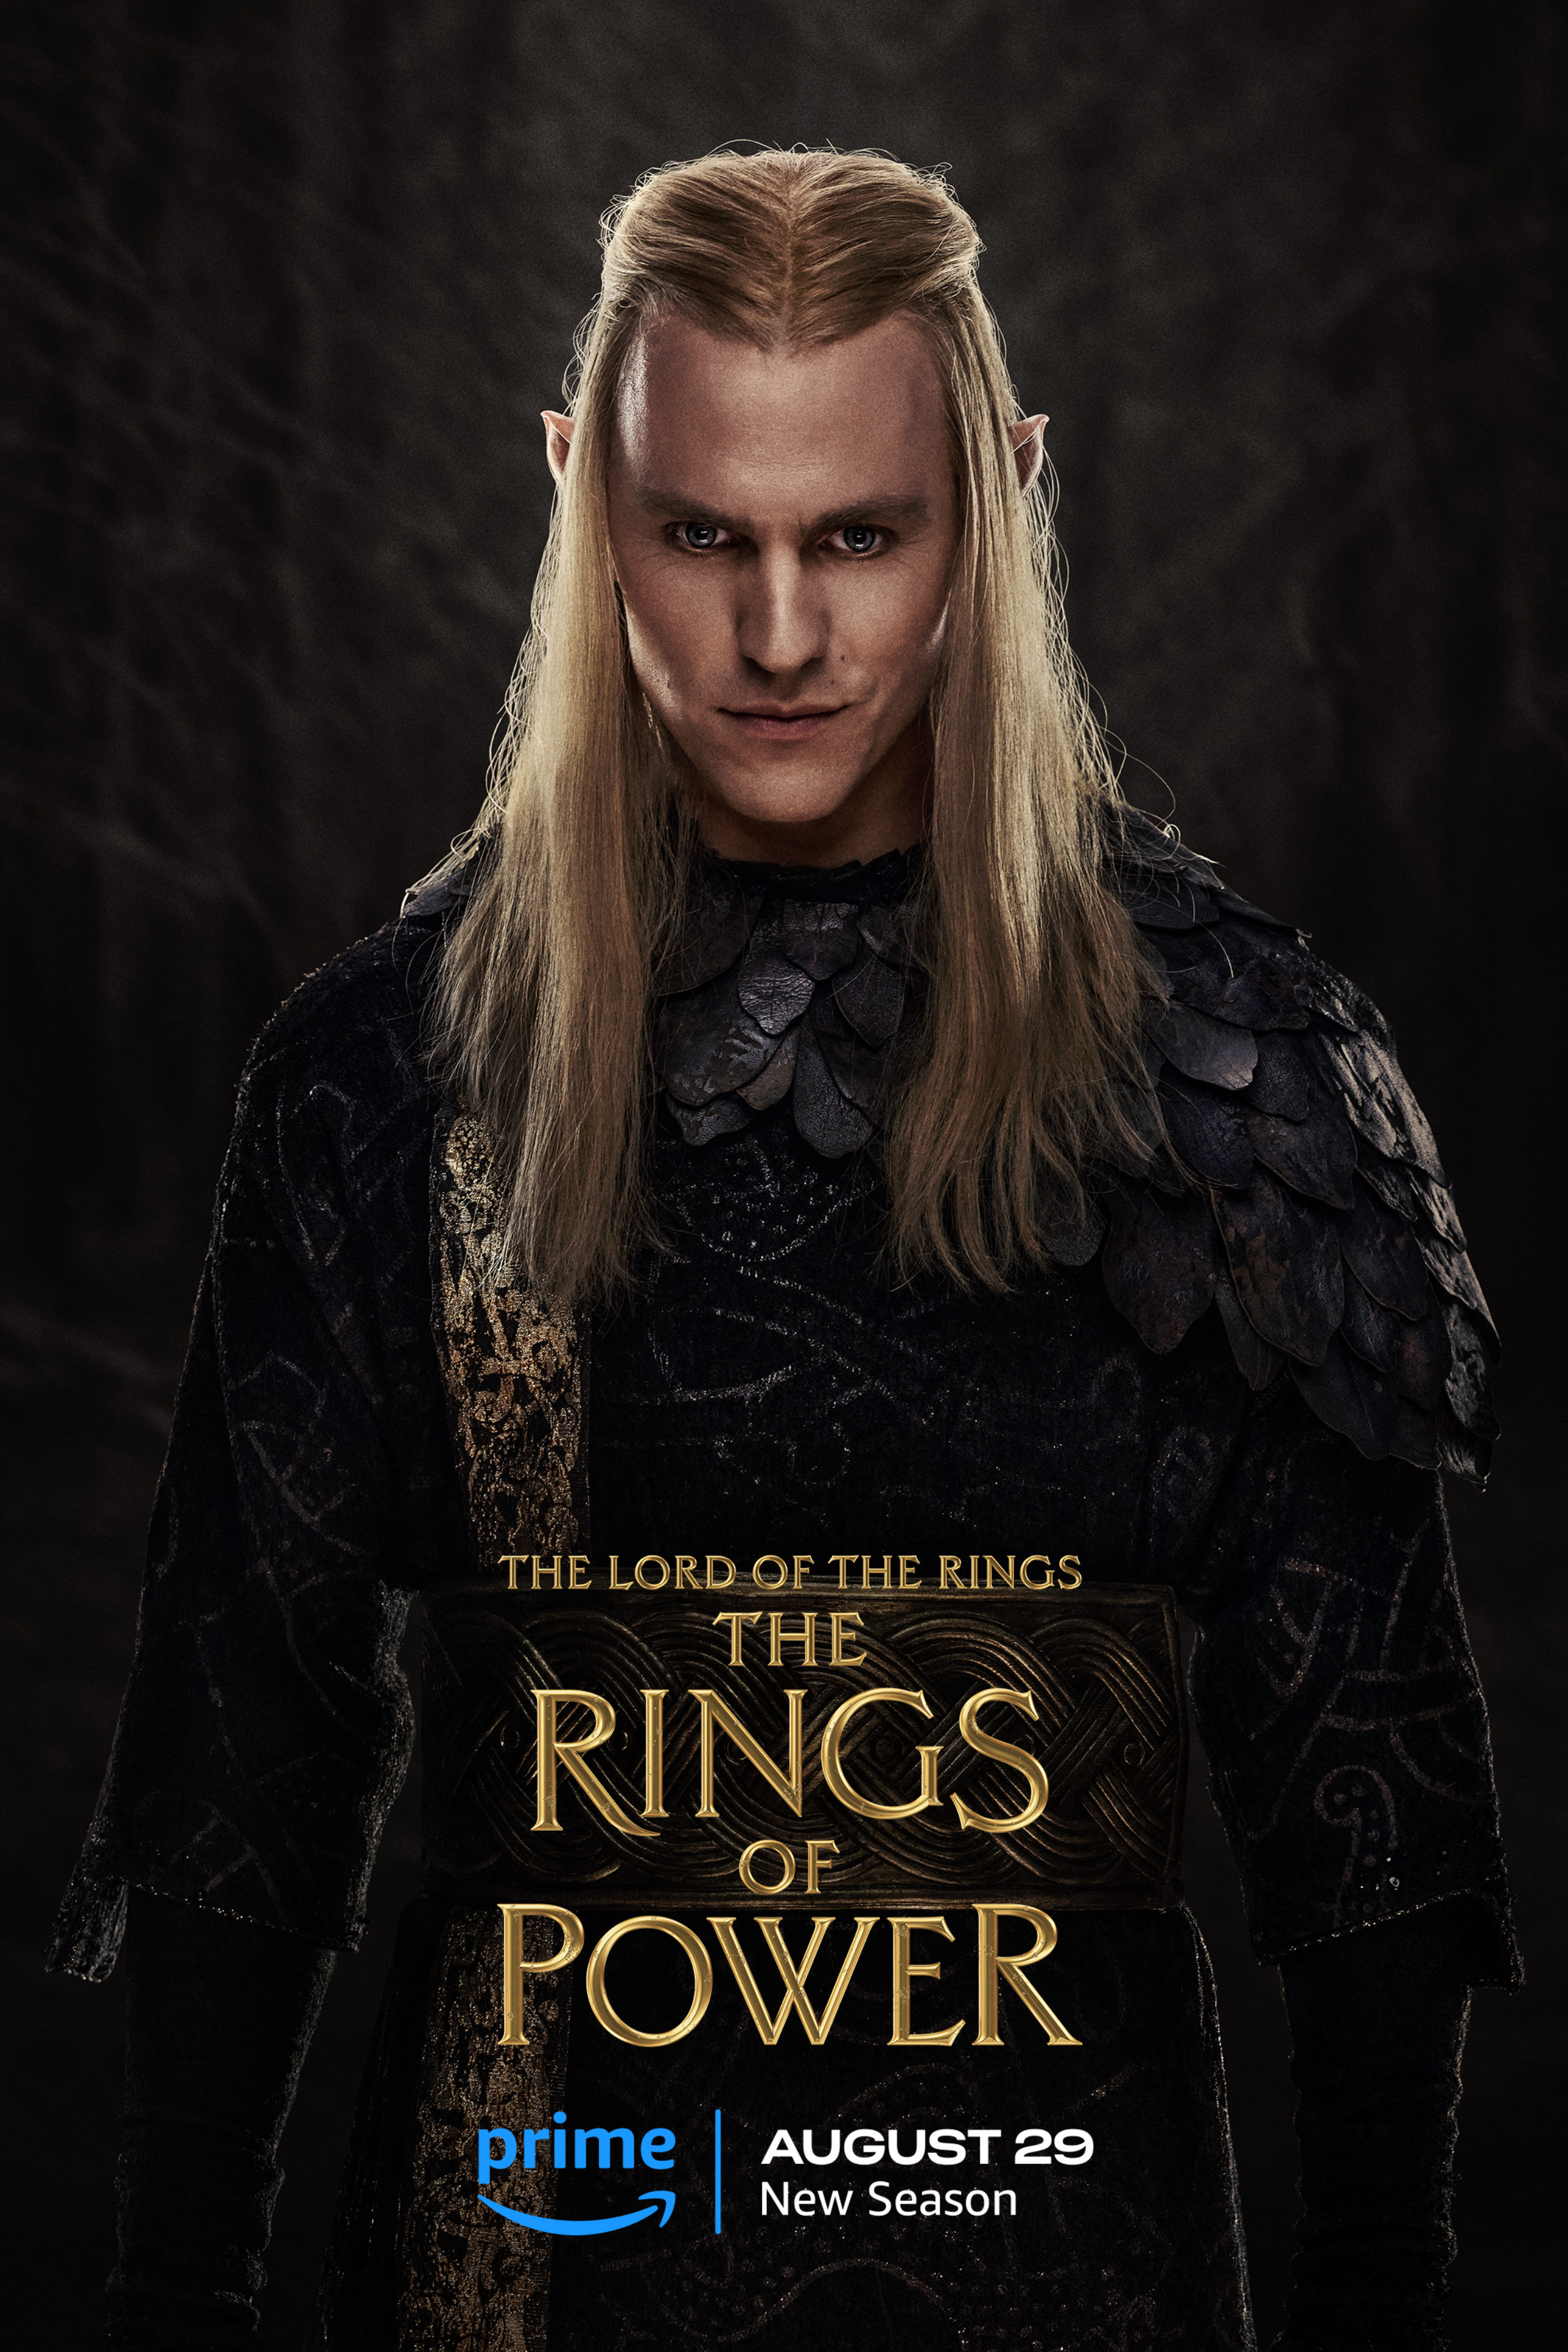 The Lord of the Rings: The Rings of Power, Amazon MGM Studios